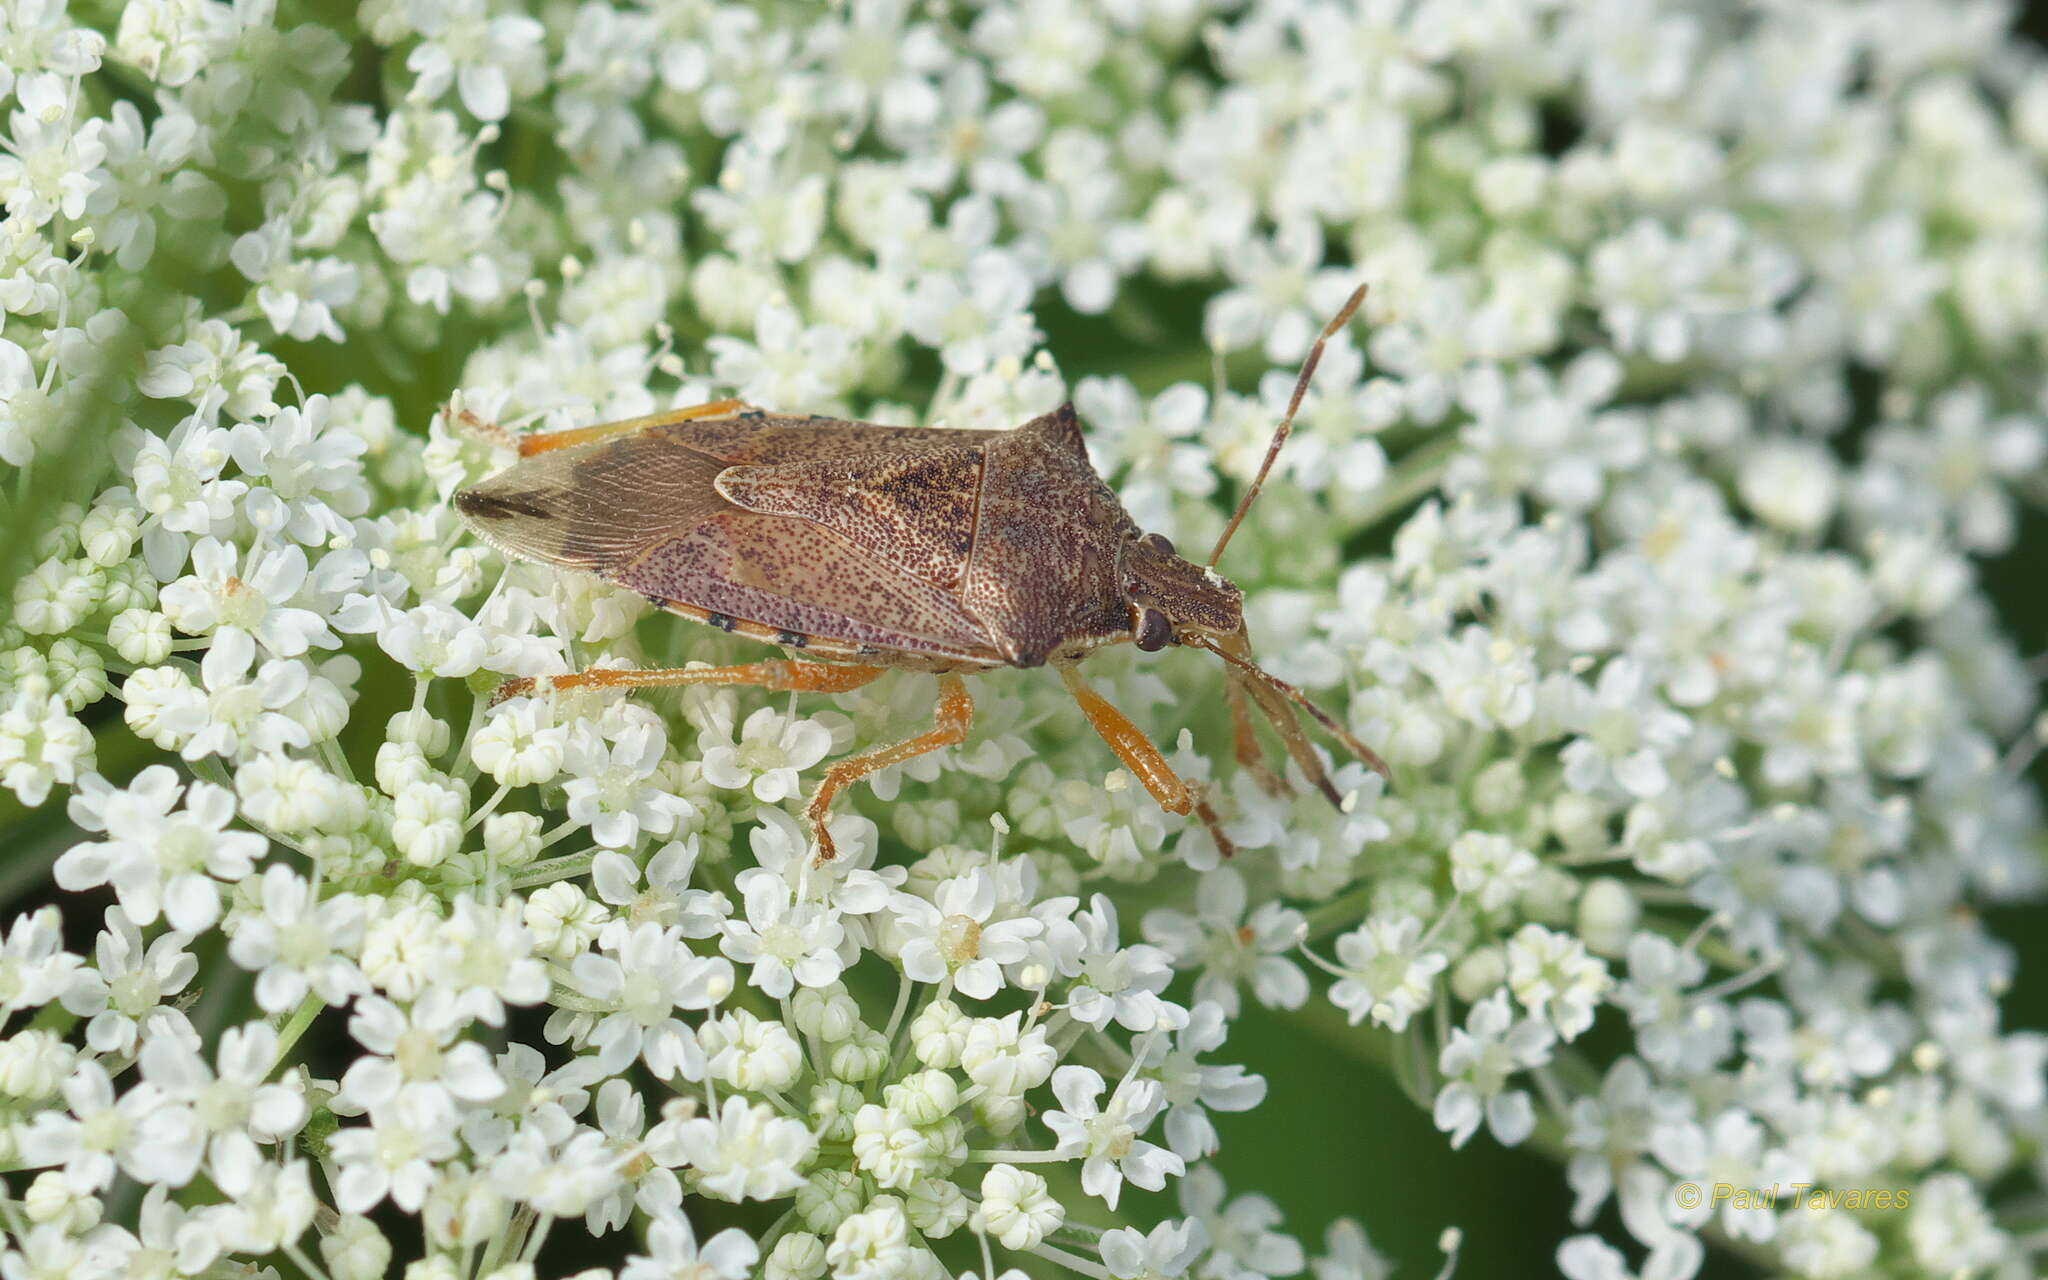 Image of Spined Soldier Bug